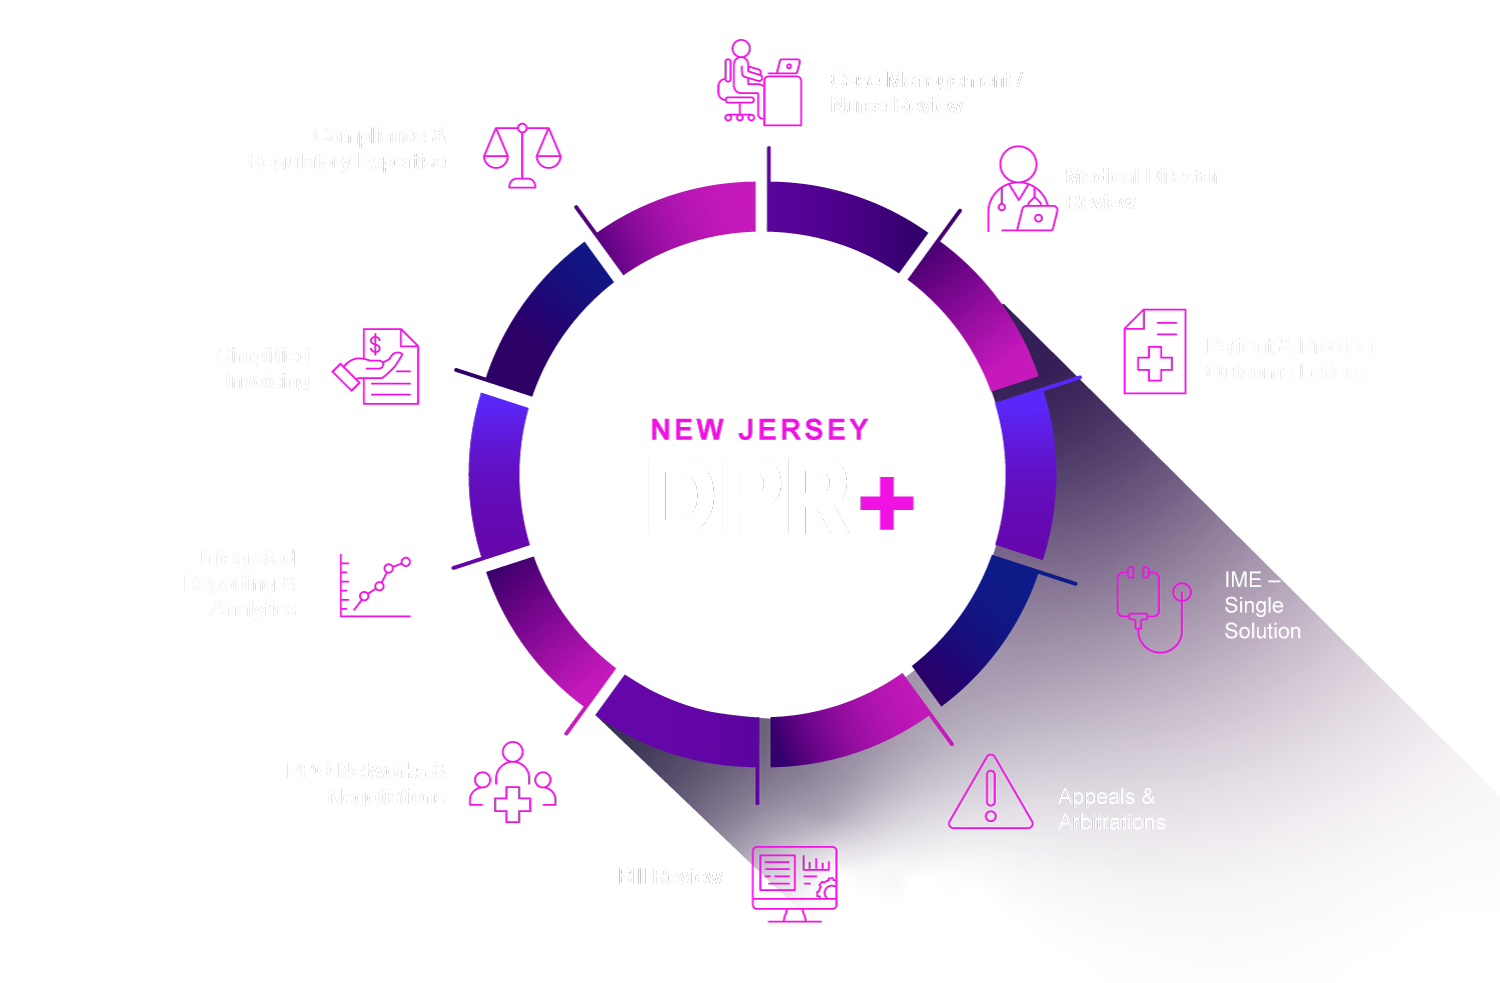 NJ DPR+ services provided